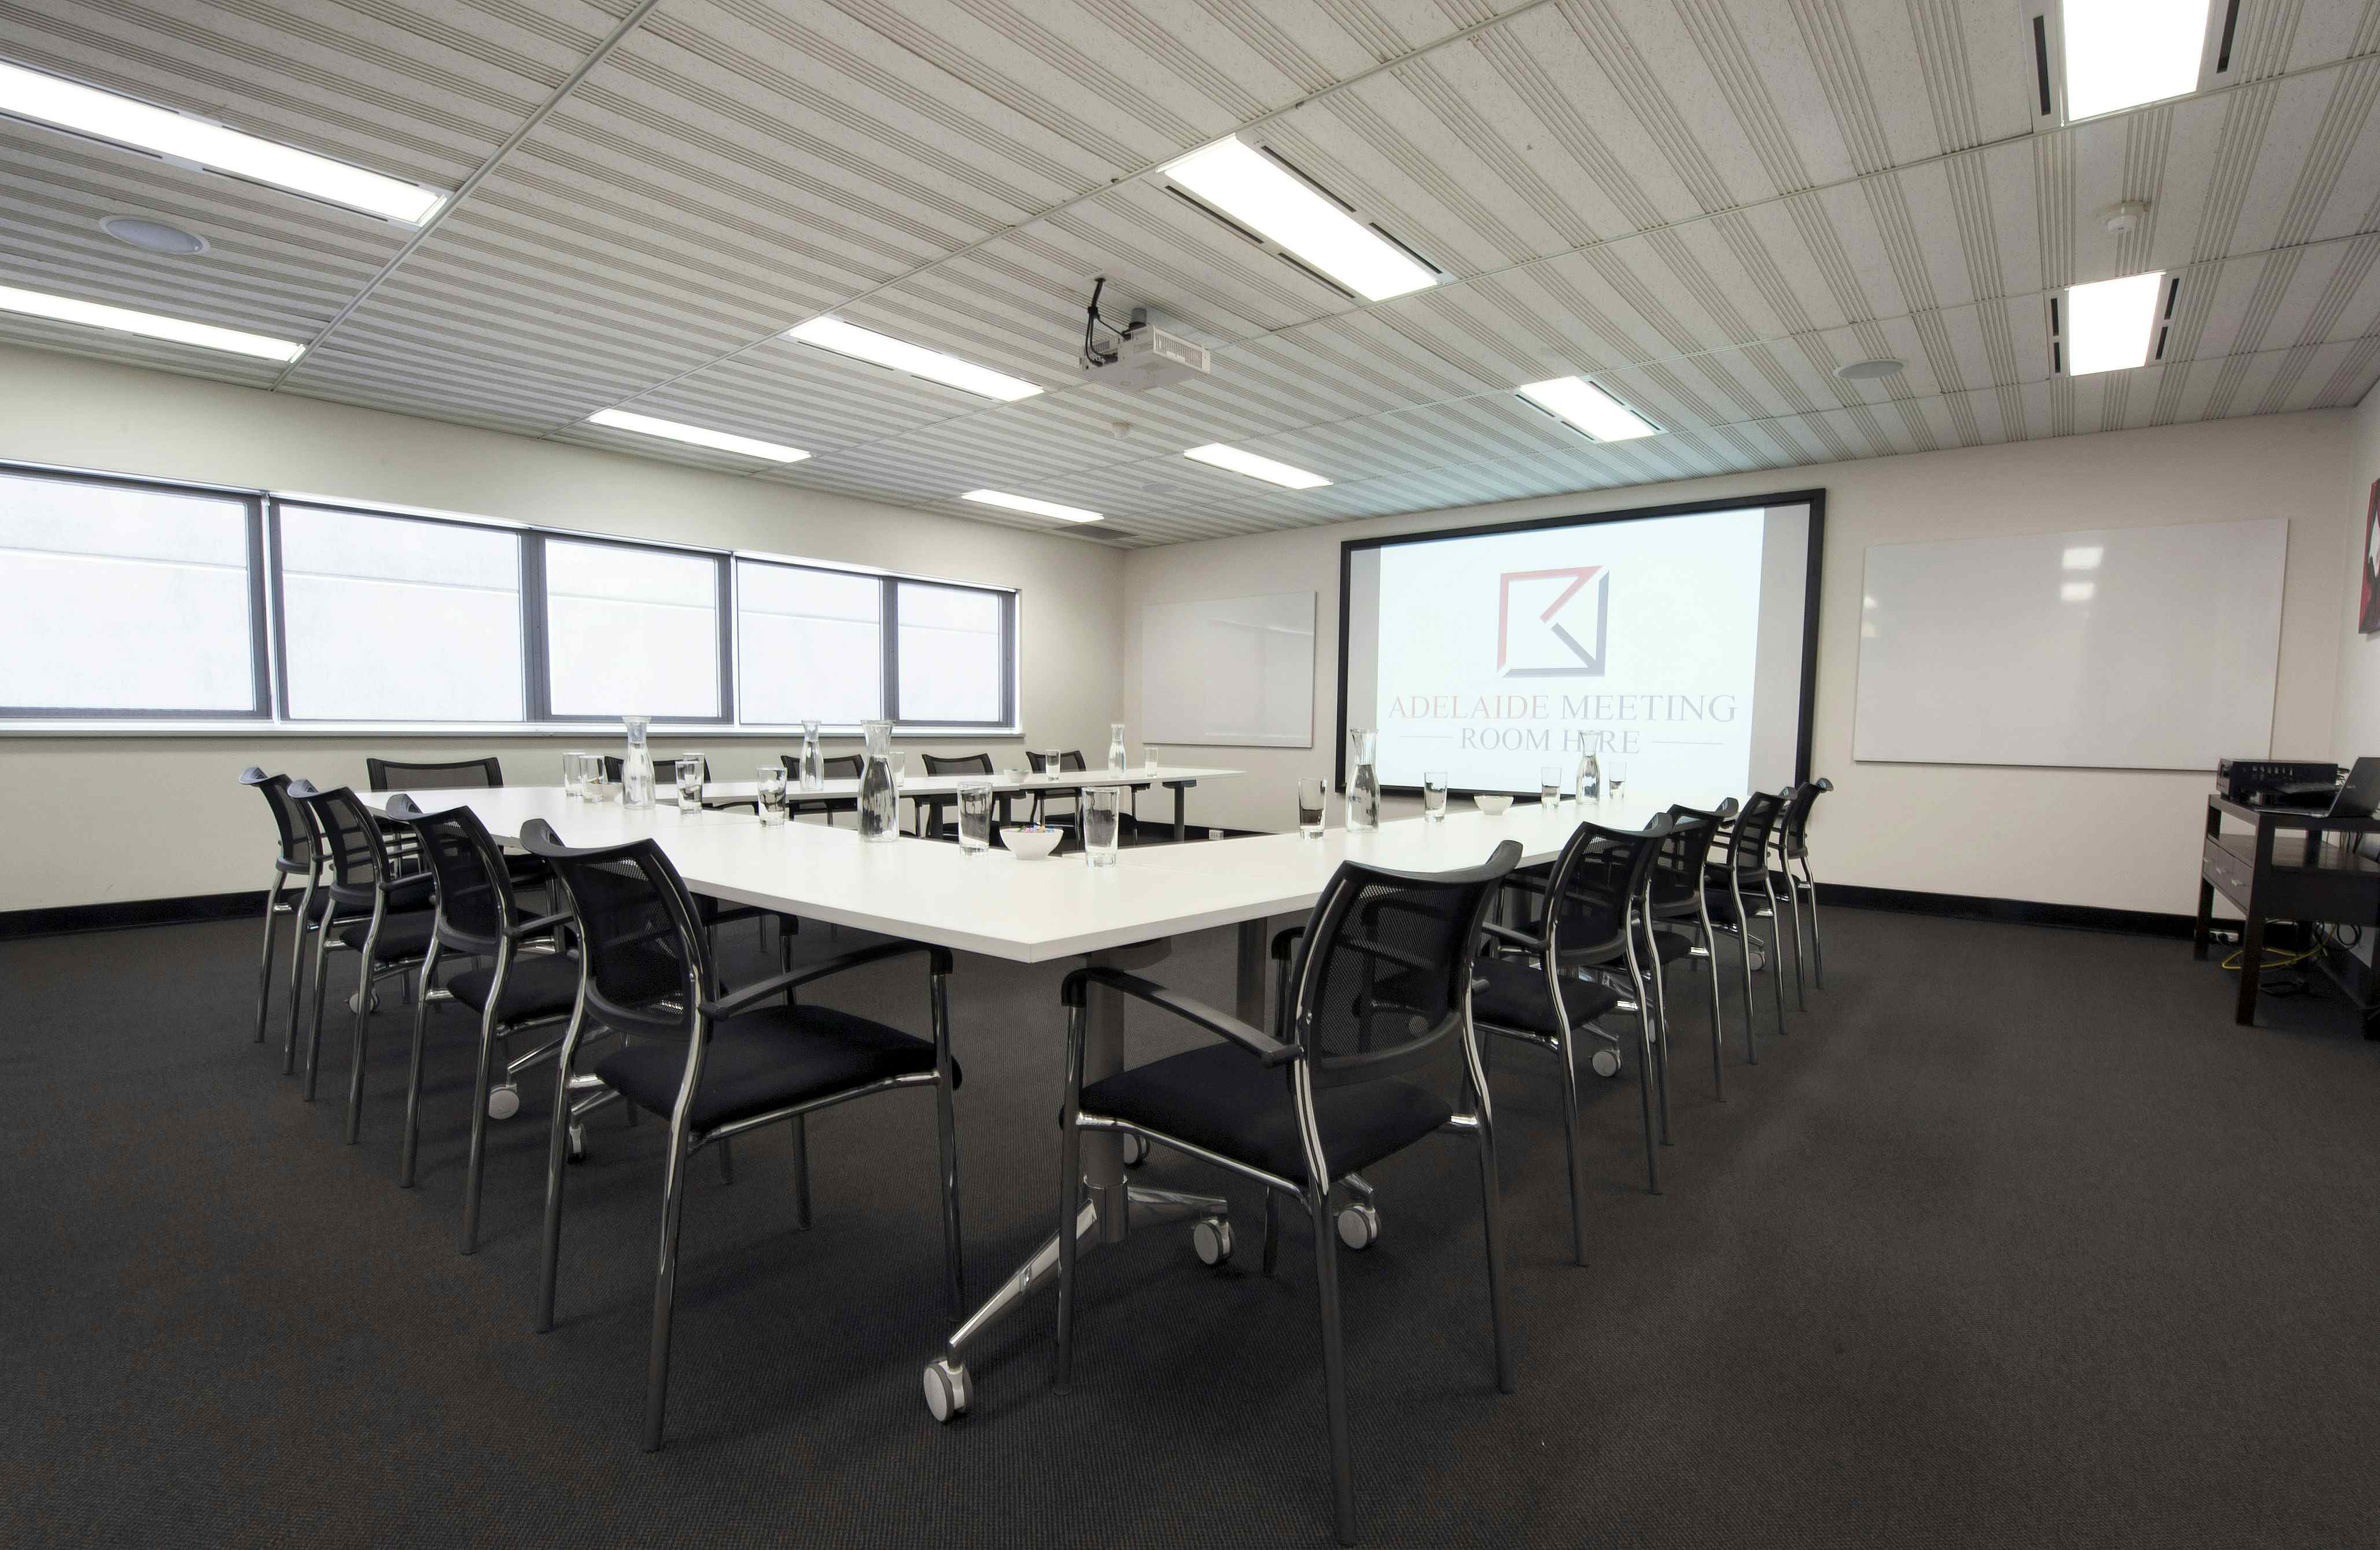 Olympic Room, Adelaide Meeting Room Hire